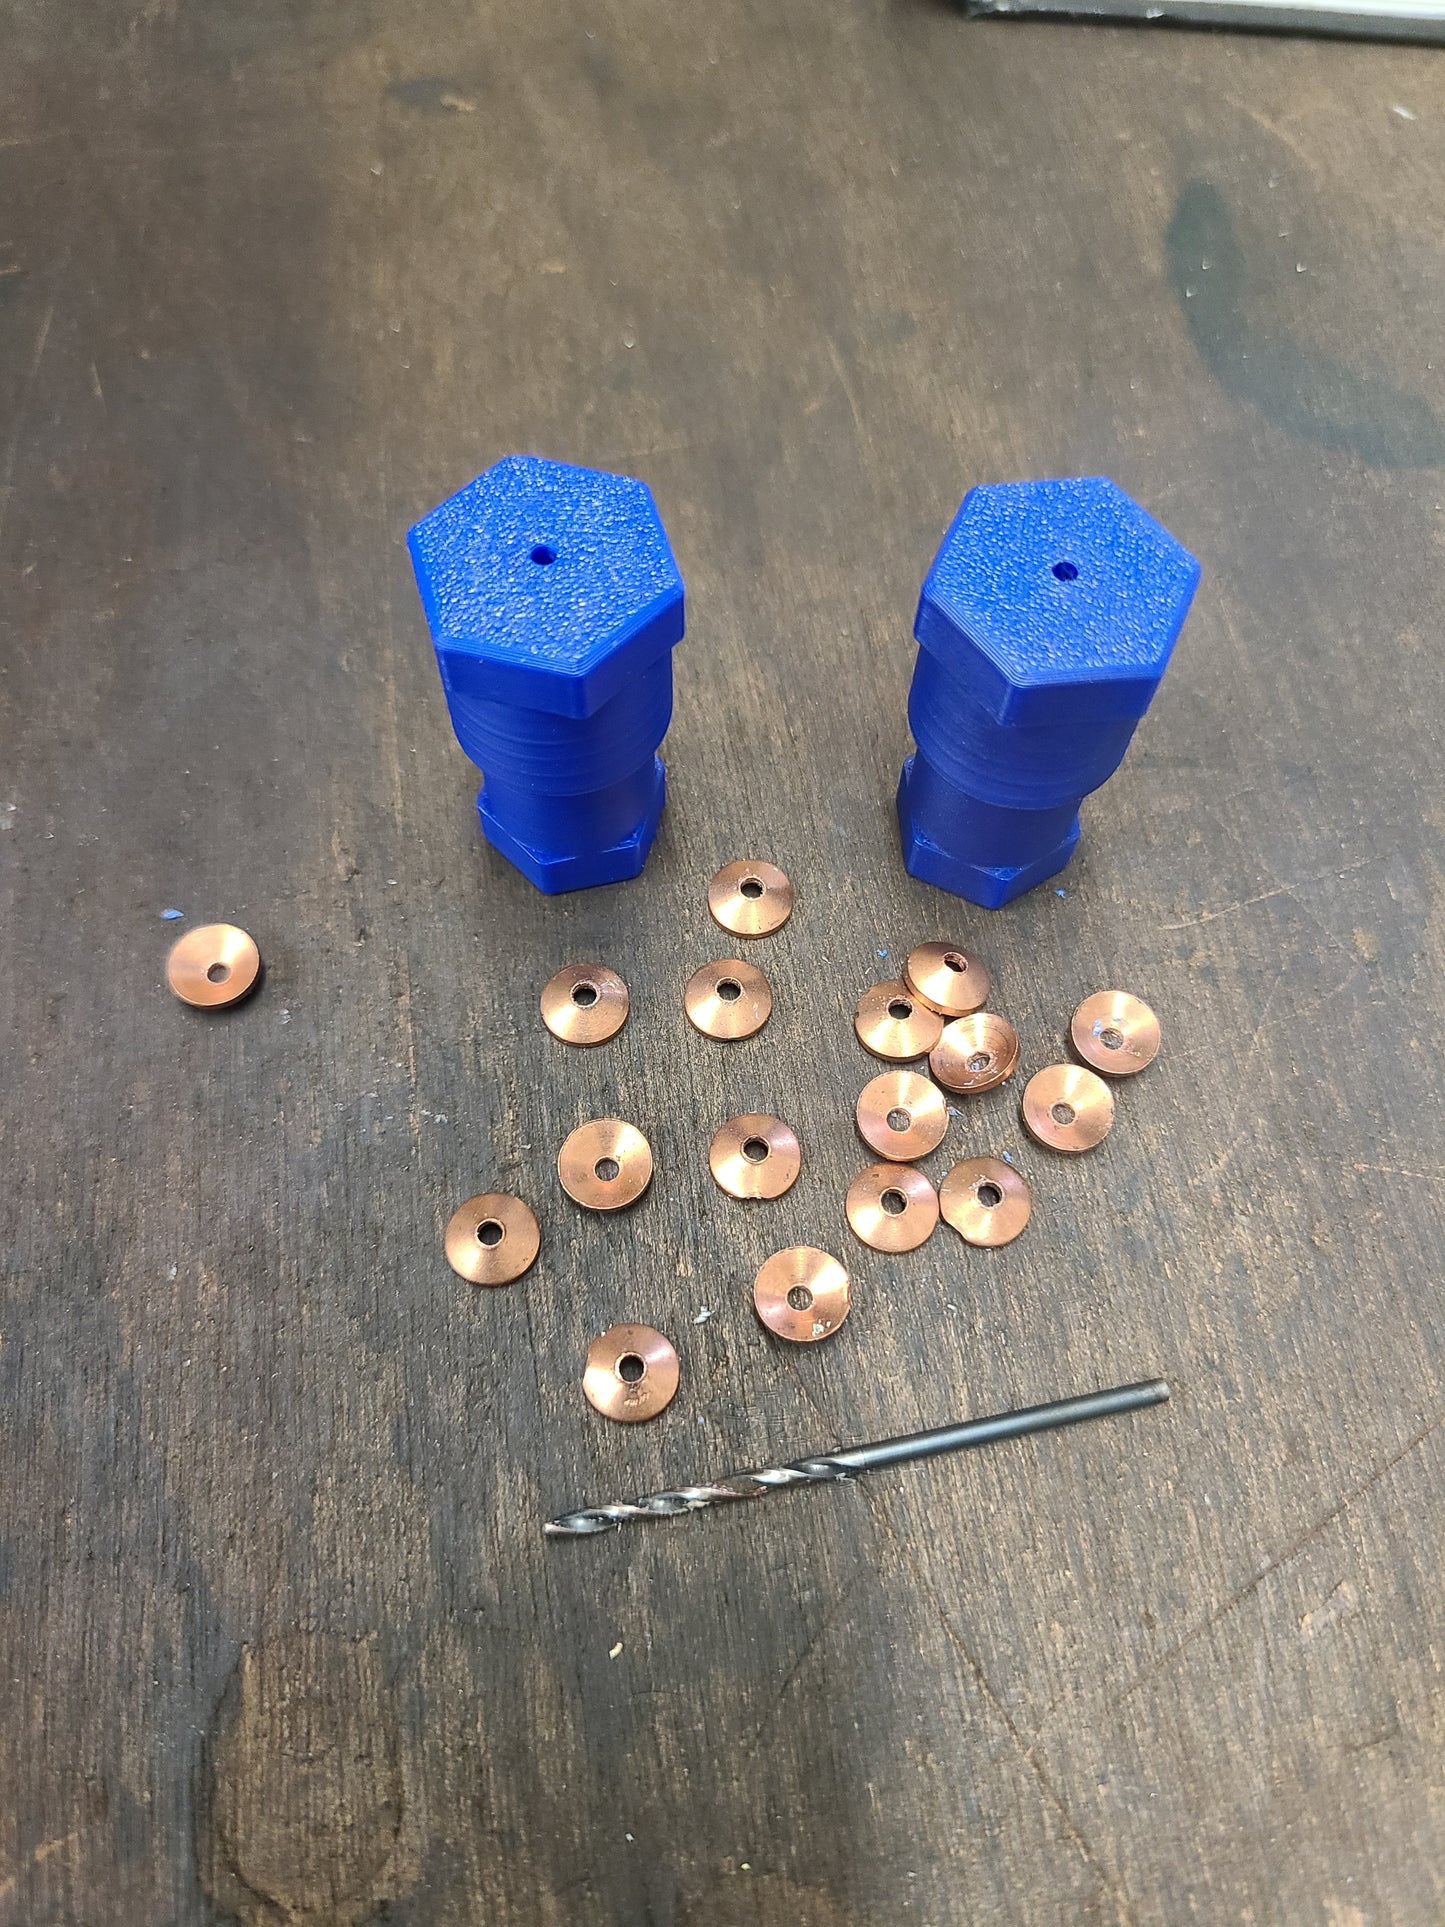 Copper Rove Drilling Jig For Resizing Rivet Nail Hole Used In Boat Building - 3D Printed 2 Pack